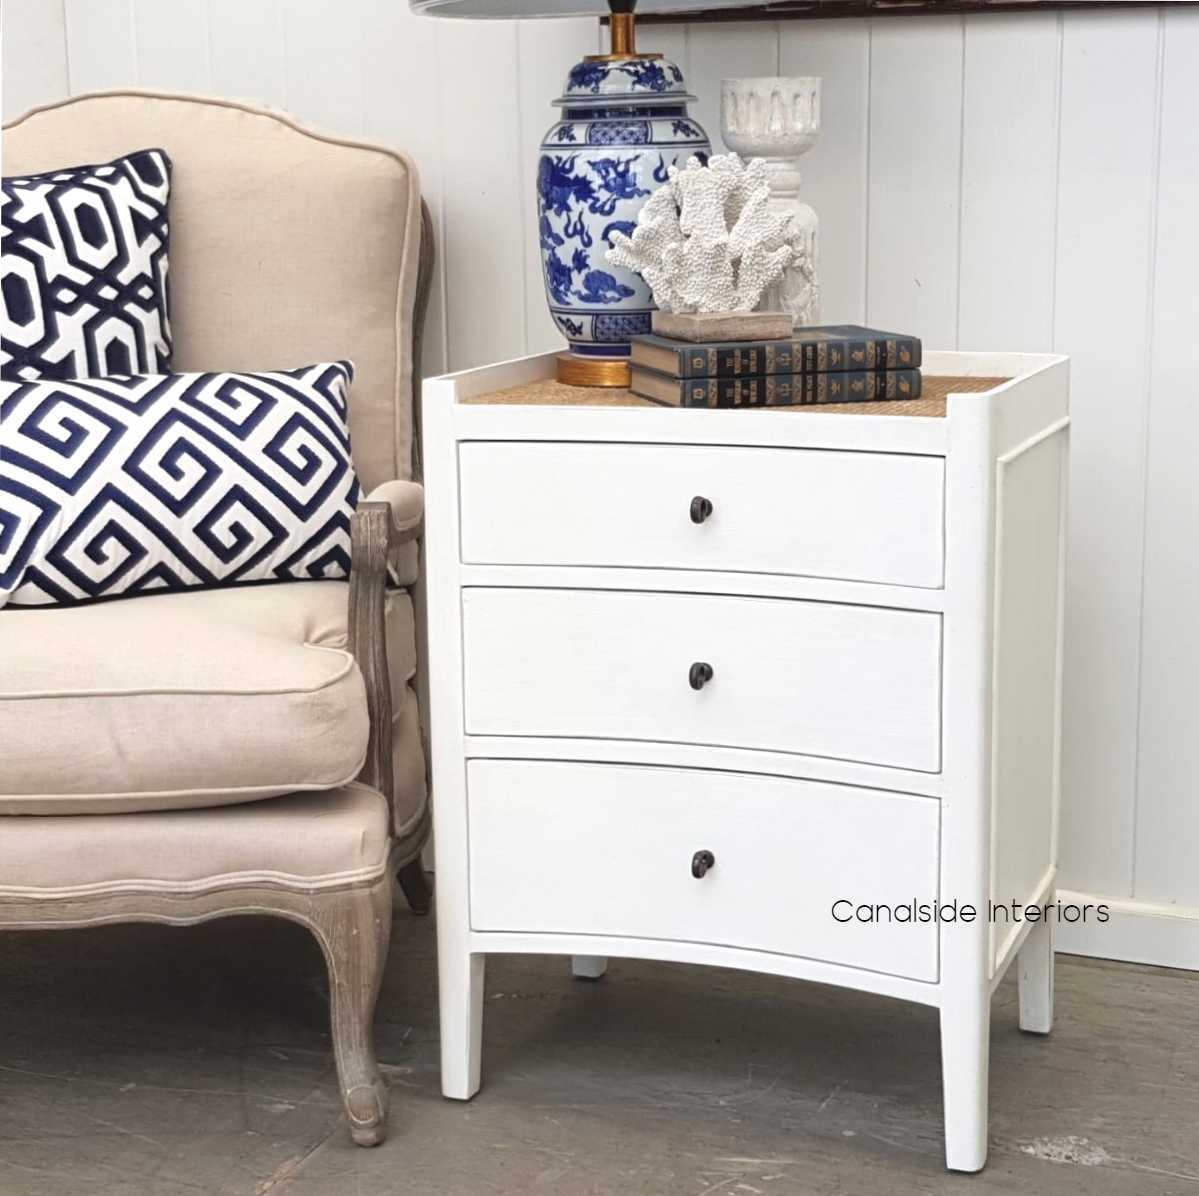 Tweed Hill Rattan Concave Bedside Distressed White  BEDROOM, TABLES, HAMPTONS Style, PLANTATION Style, TABLES Side Tables, LIVING Coffee & Side Tables, BEDROOM Bedsides, PLANTATION STYLE